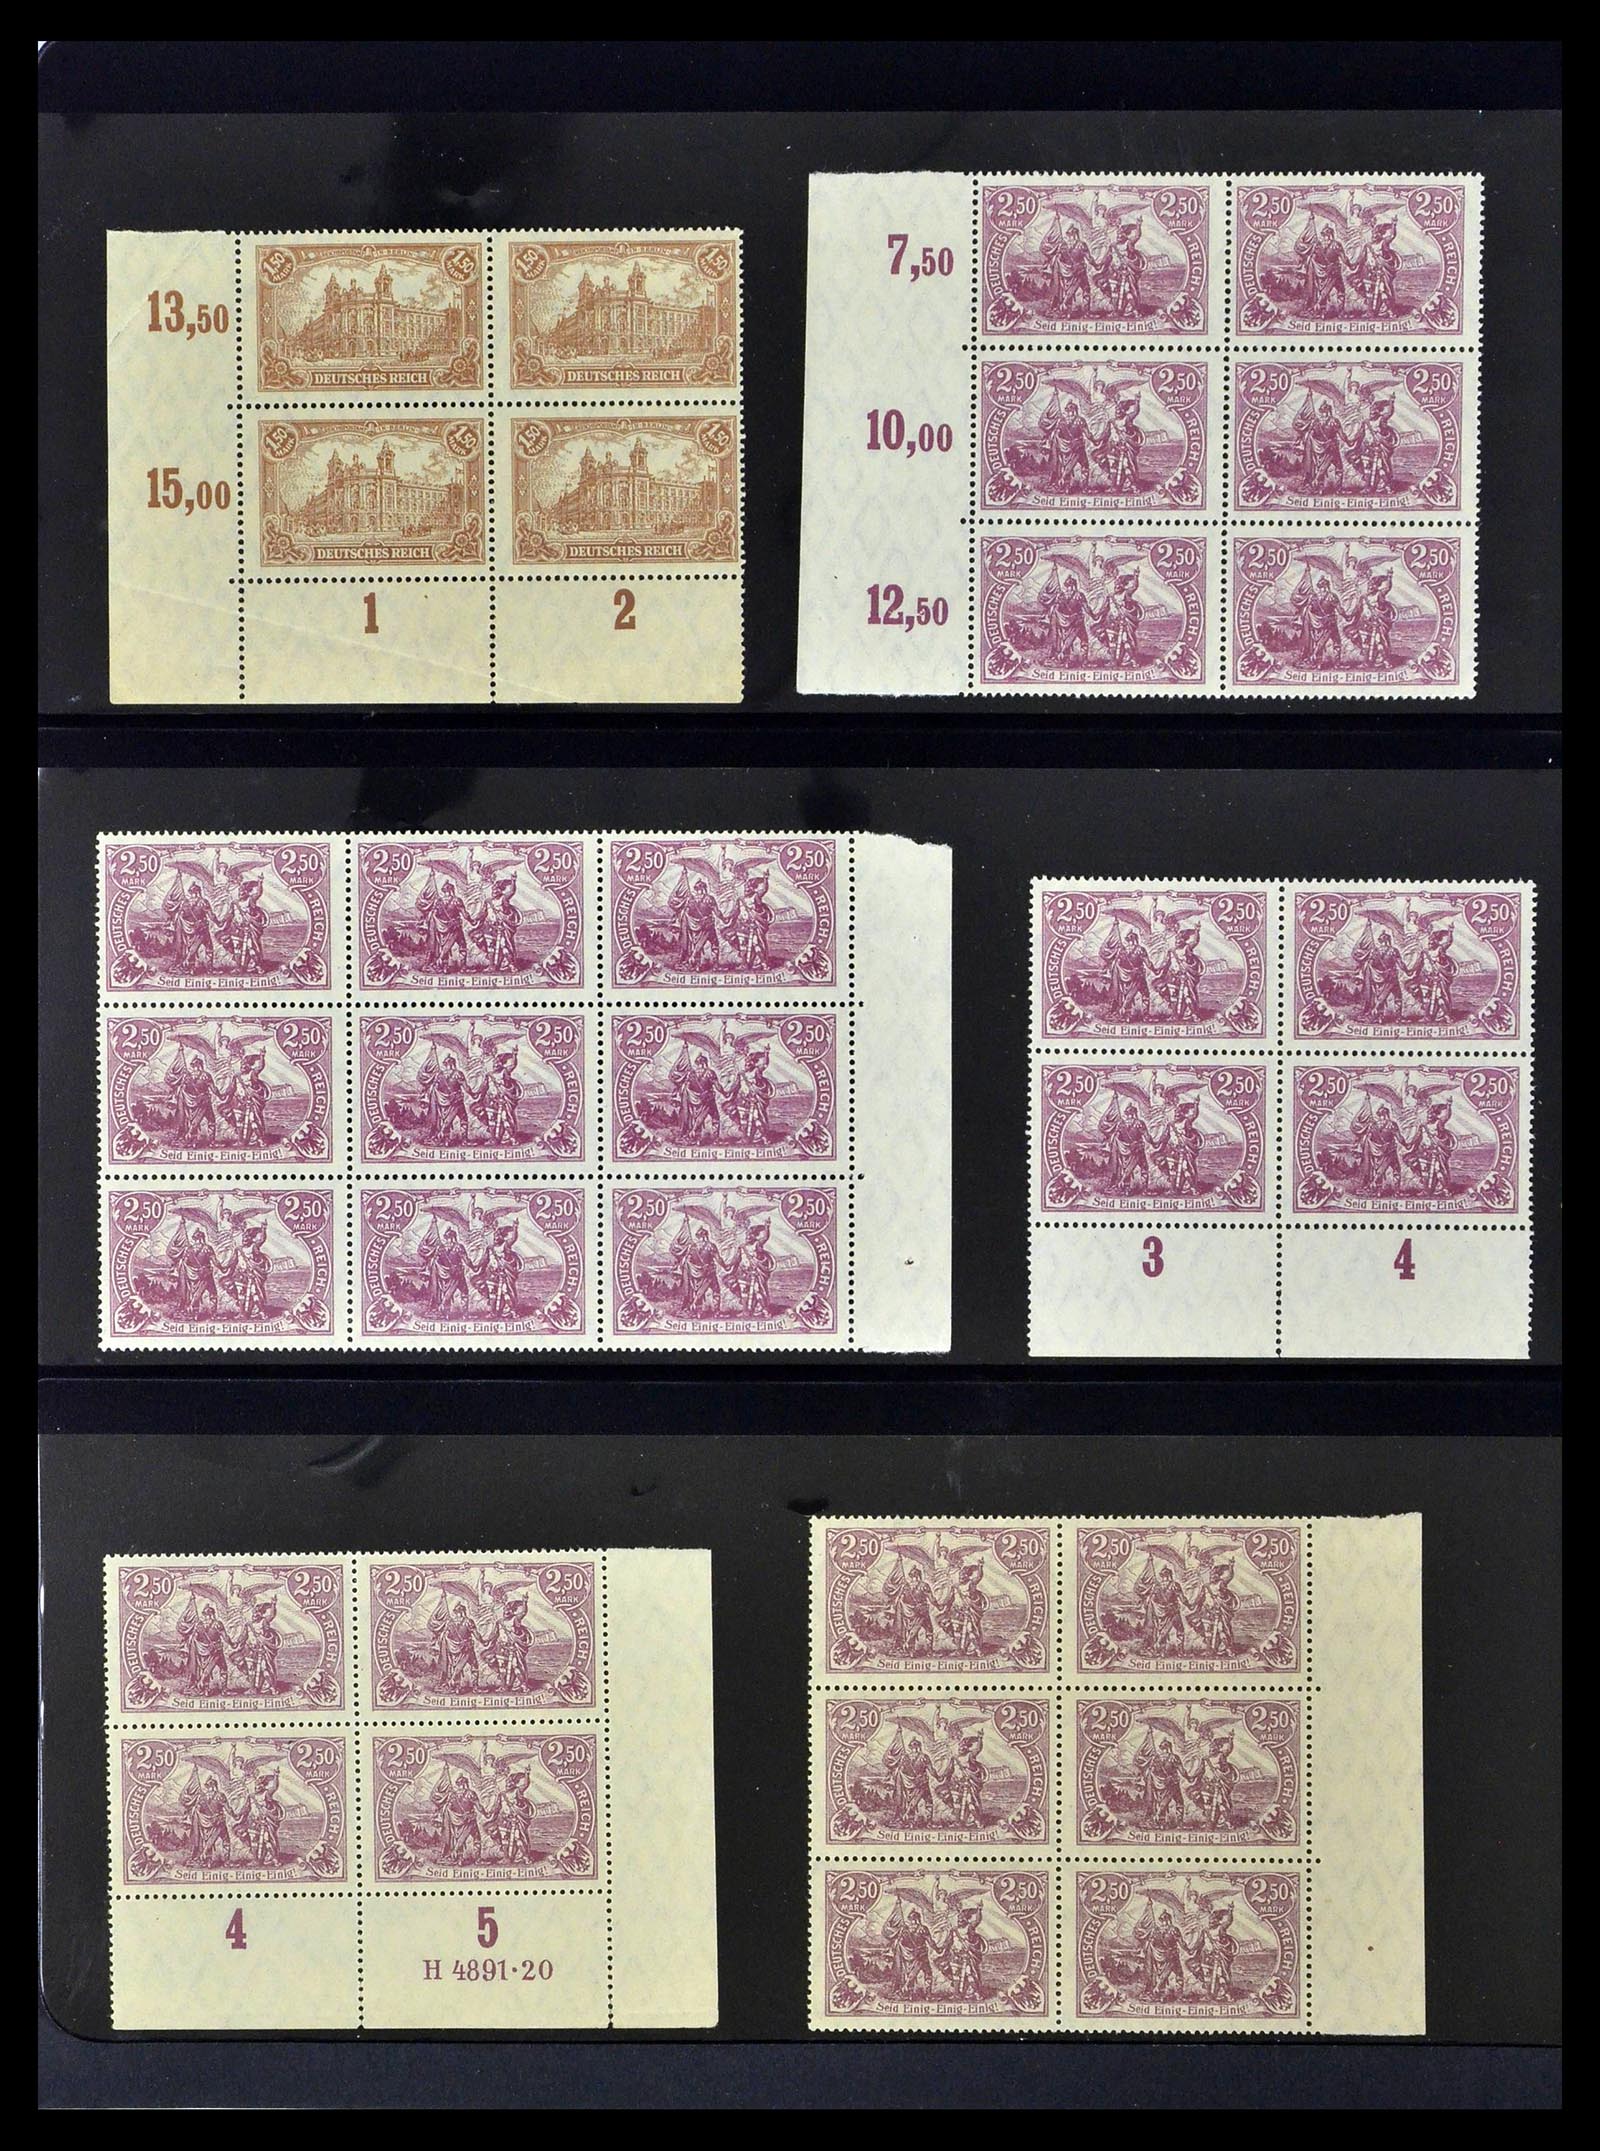 39255 0006 - Stamp collection 39255 German Reich MNH blocks of 4.